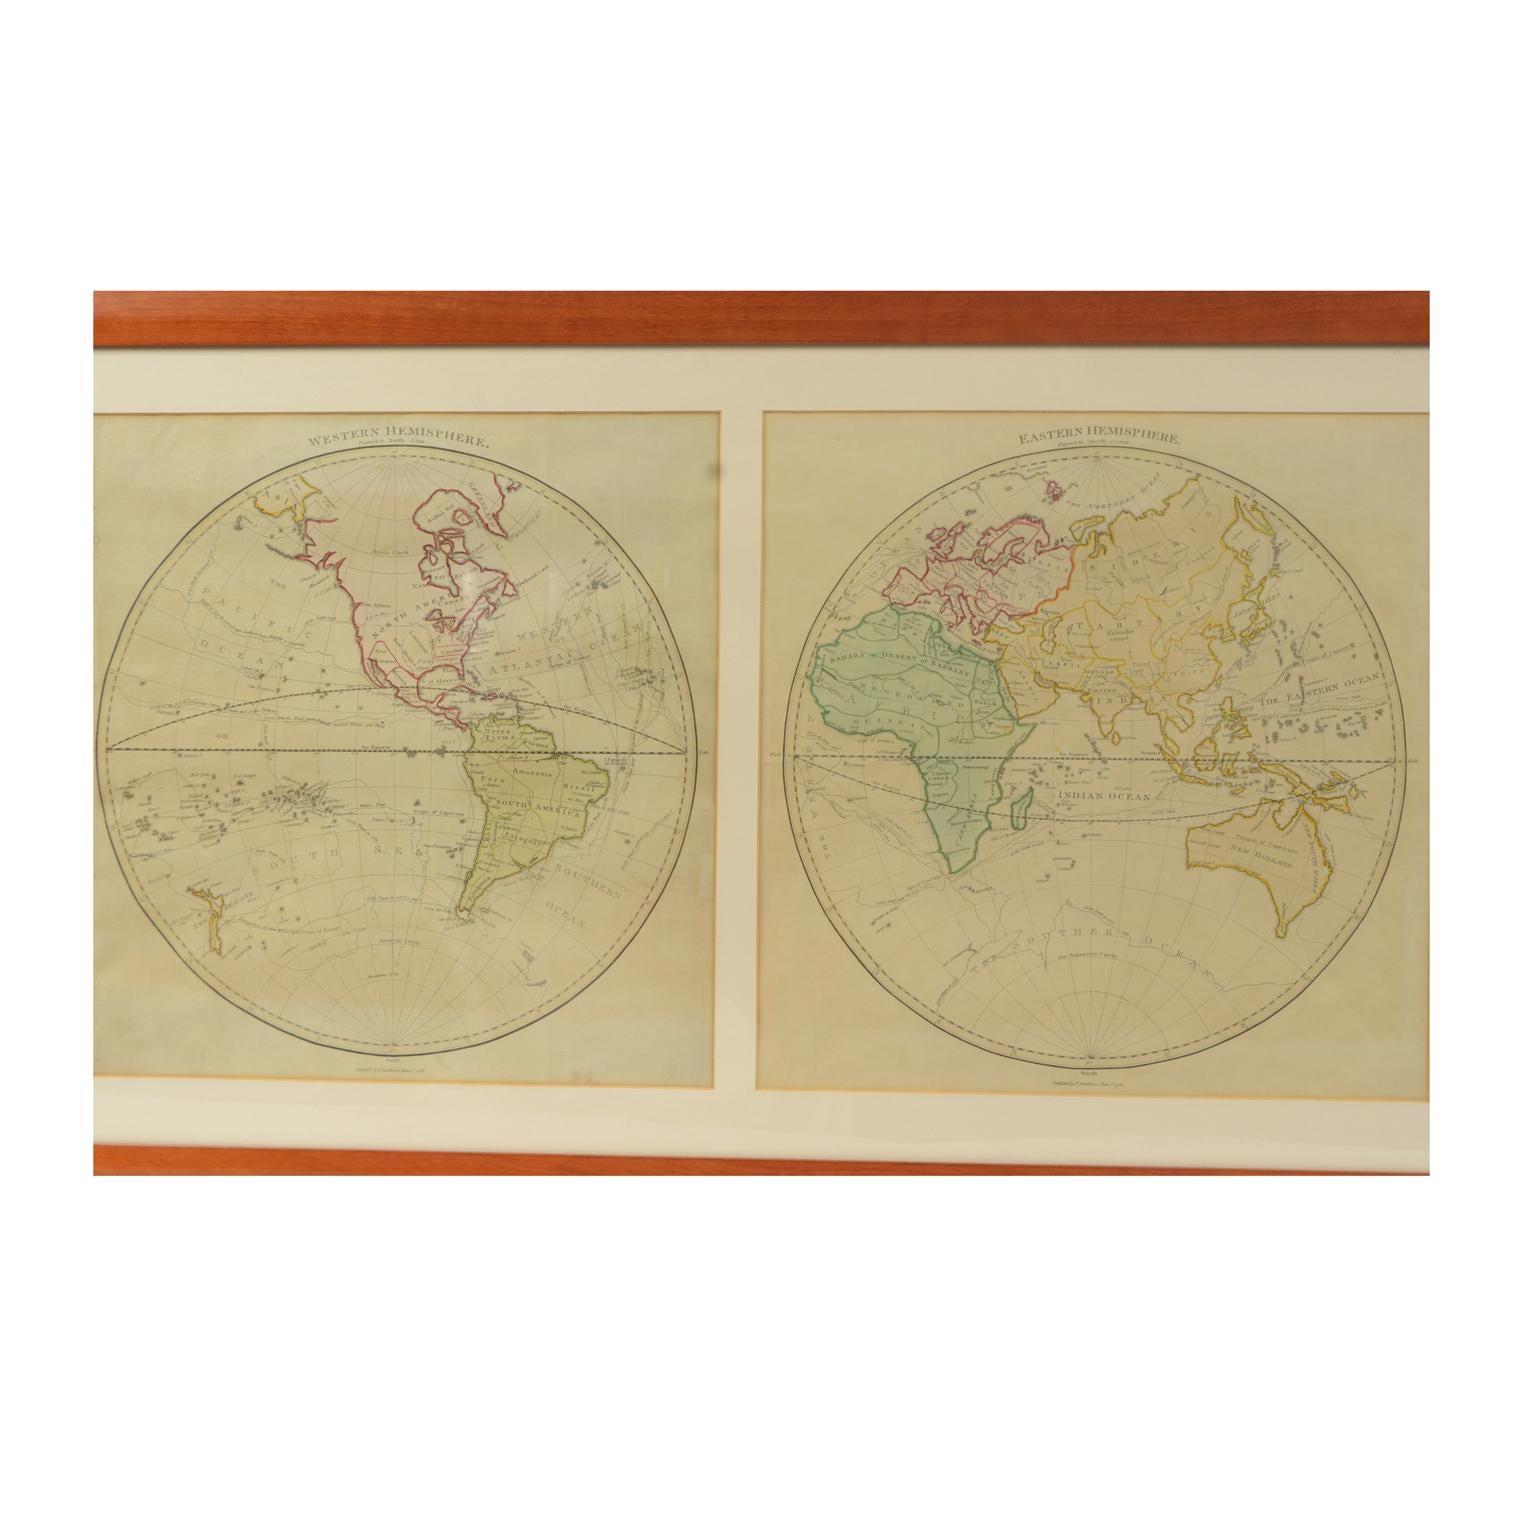 British World Map Published in June 1783 by Stackhouse and Engraved by S.J. Neele London